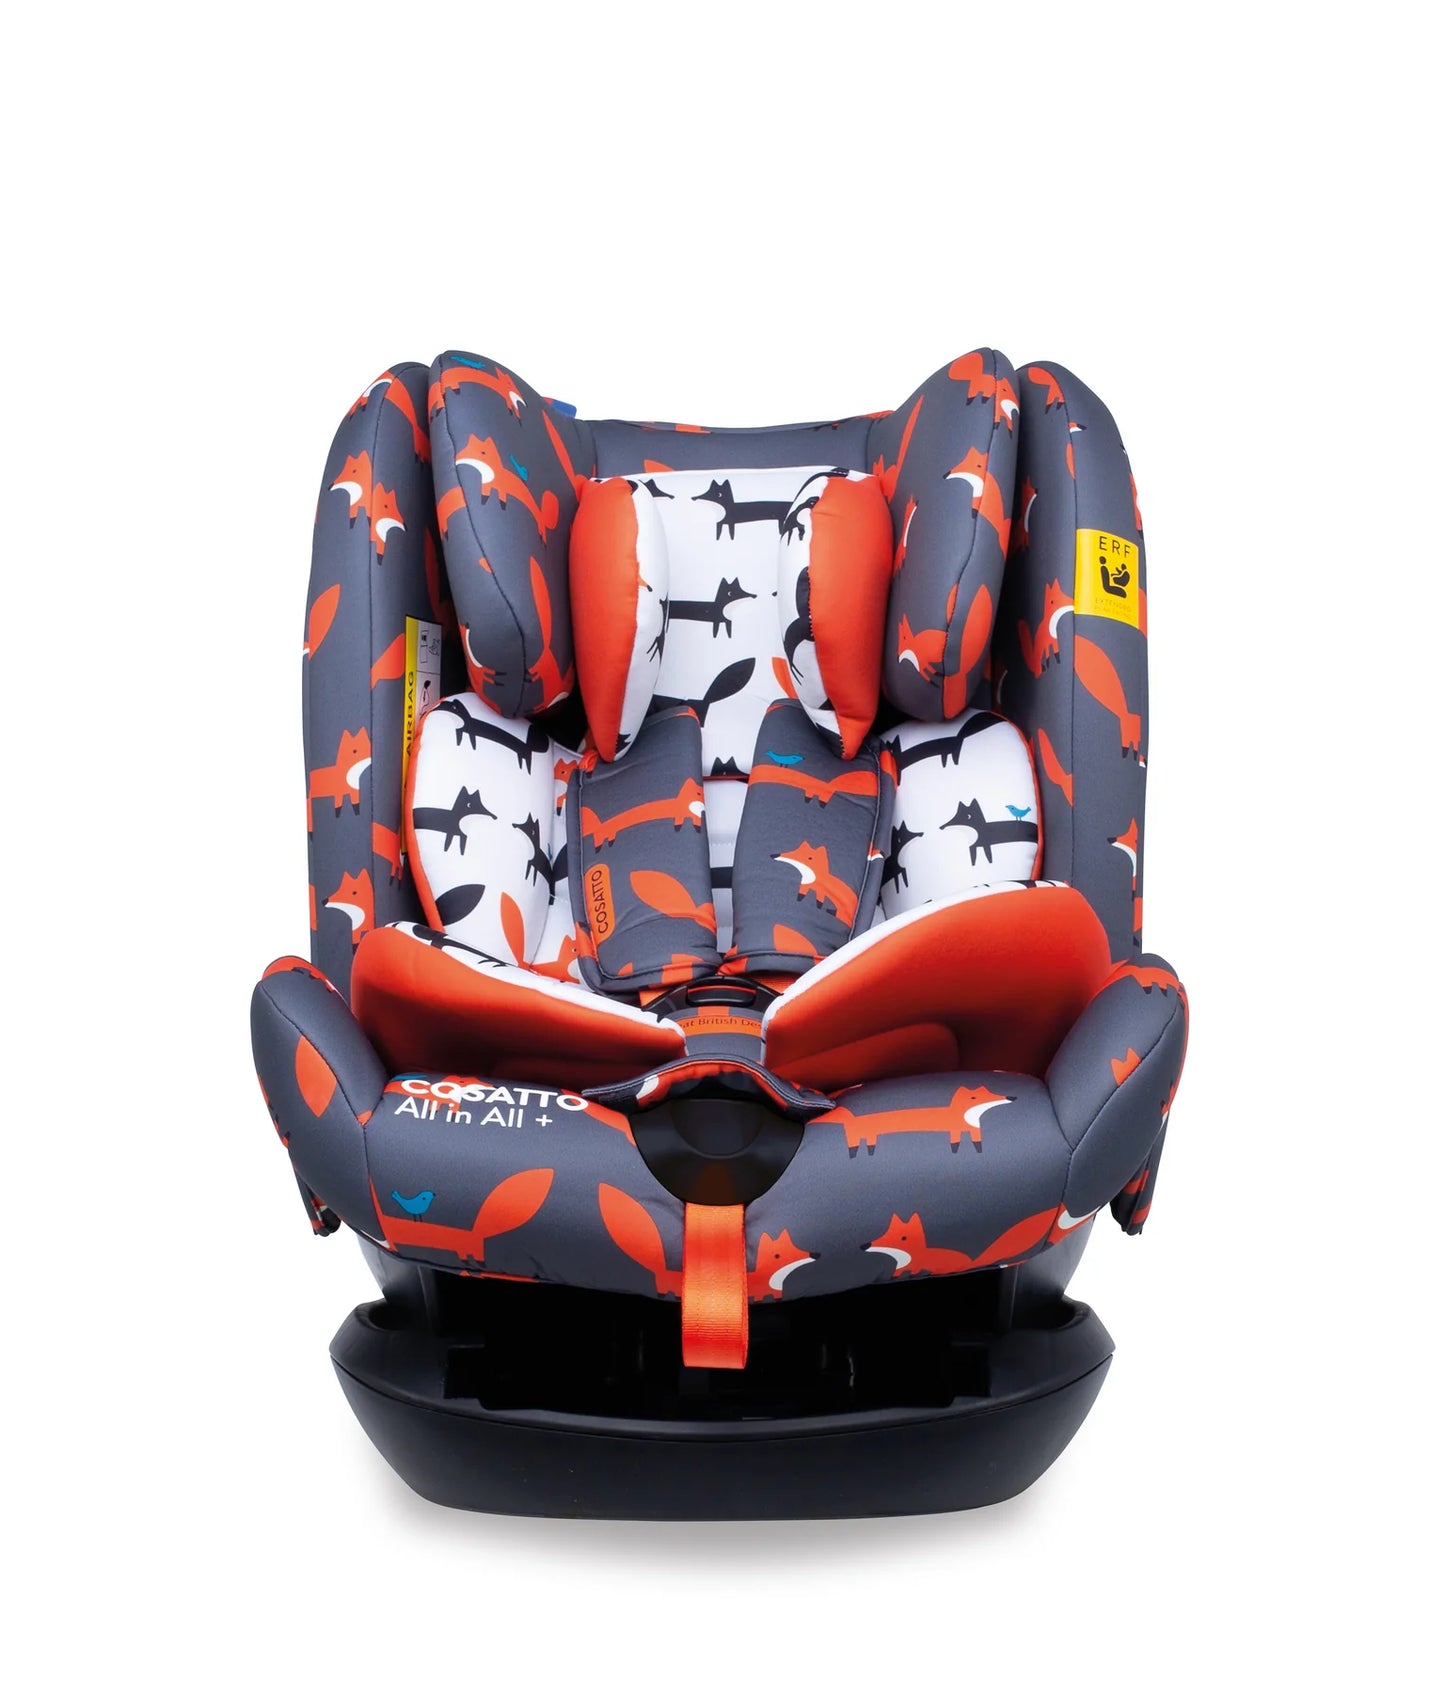 Cosatto All in All + Group 0+123 Car Seat Mister Fox